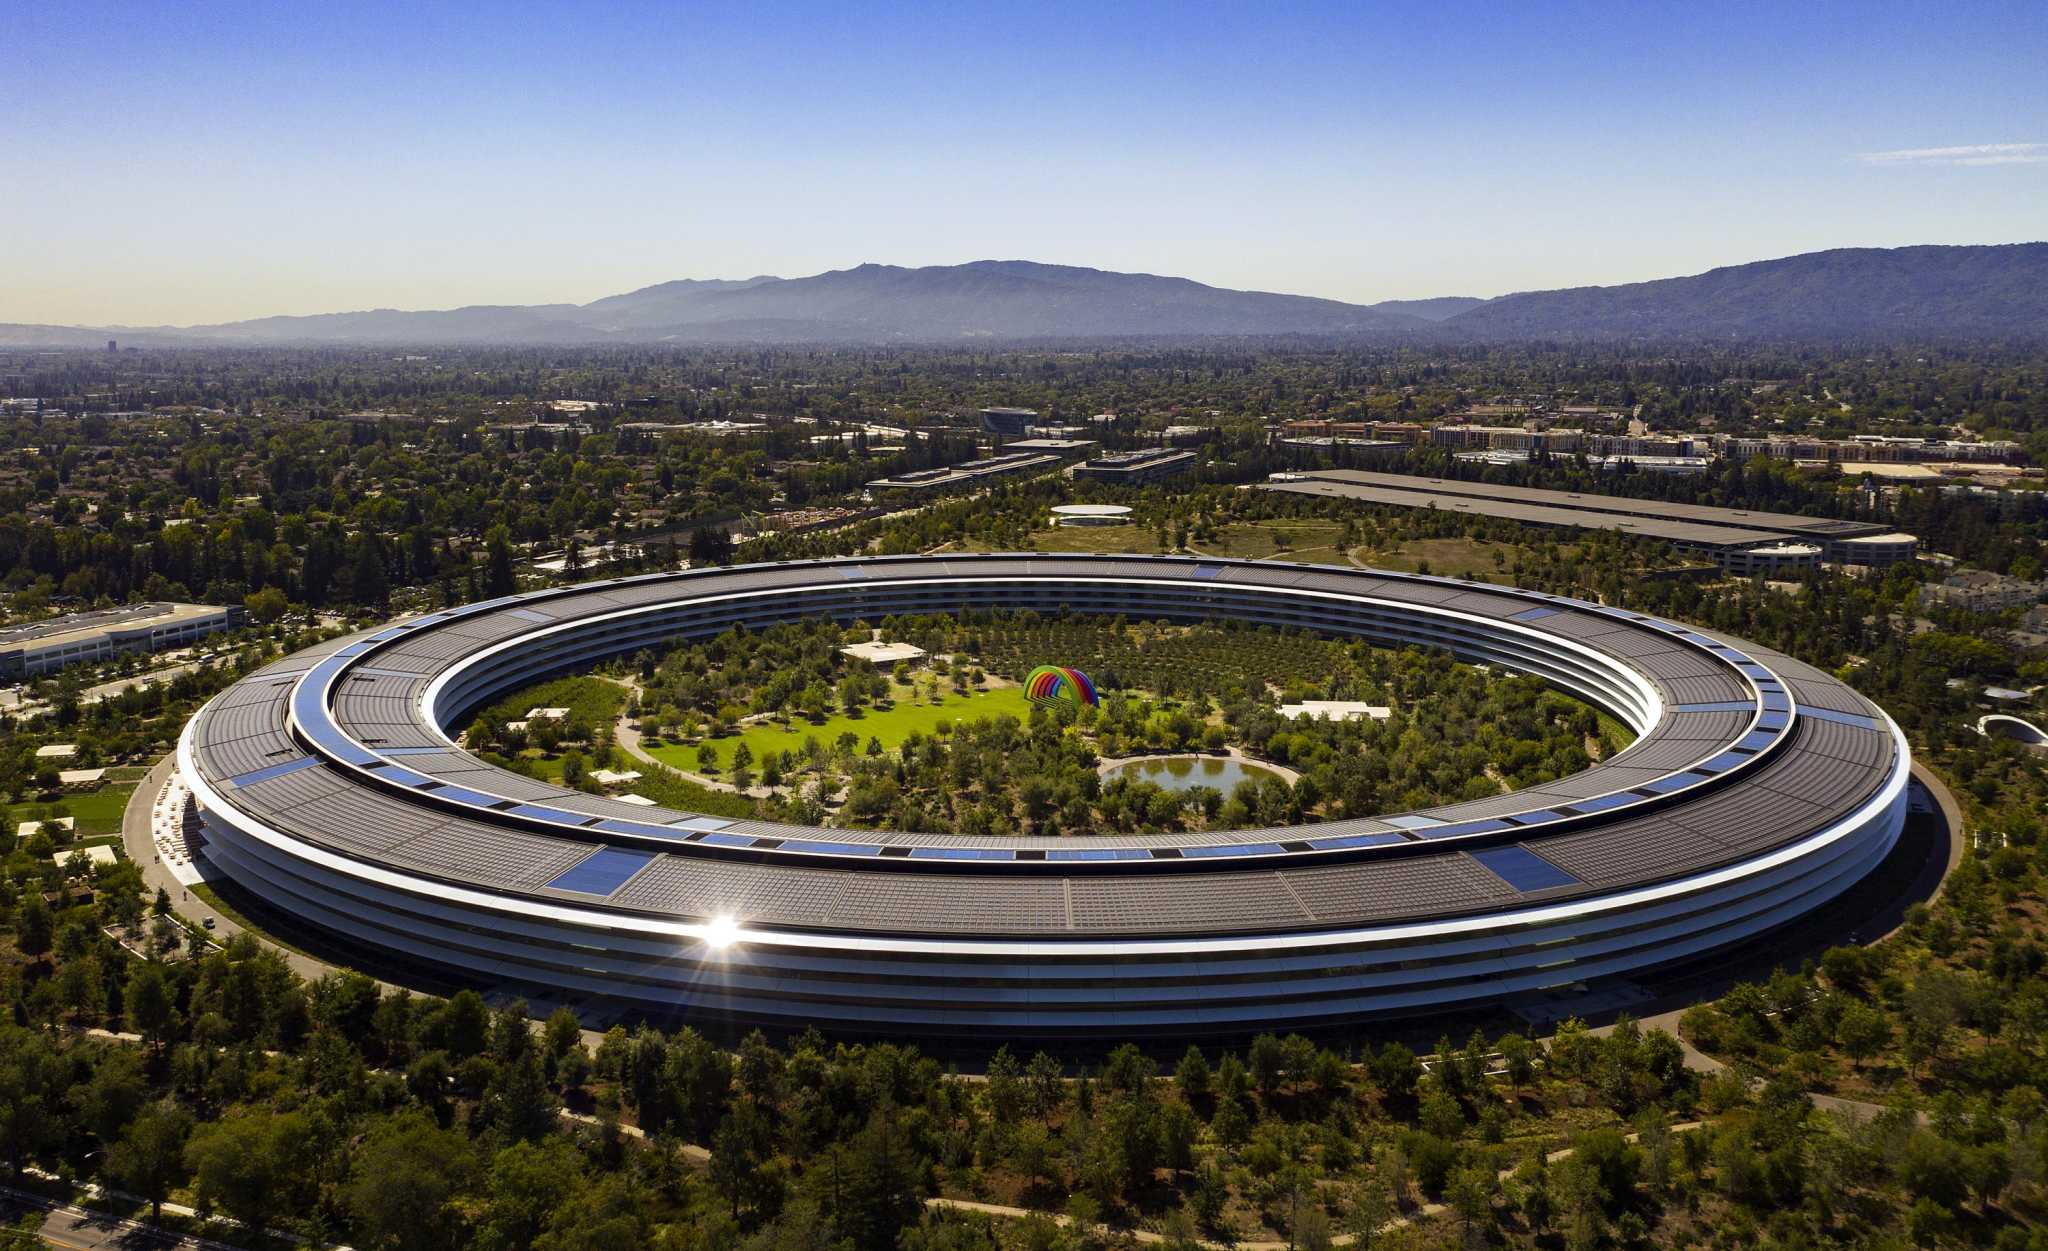 Apple workers required to return to the office in April 